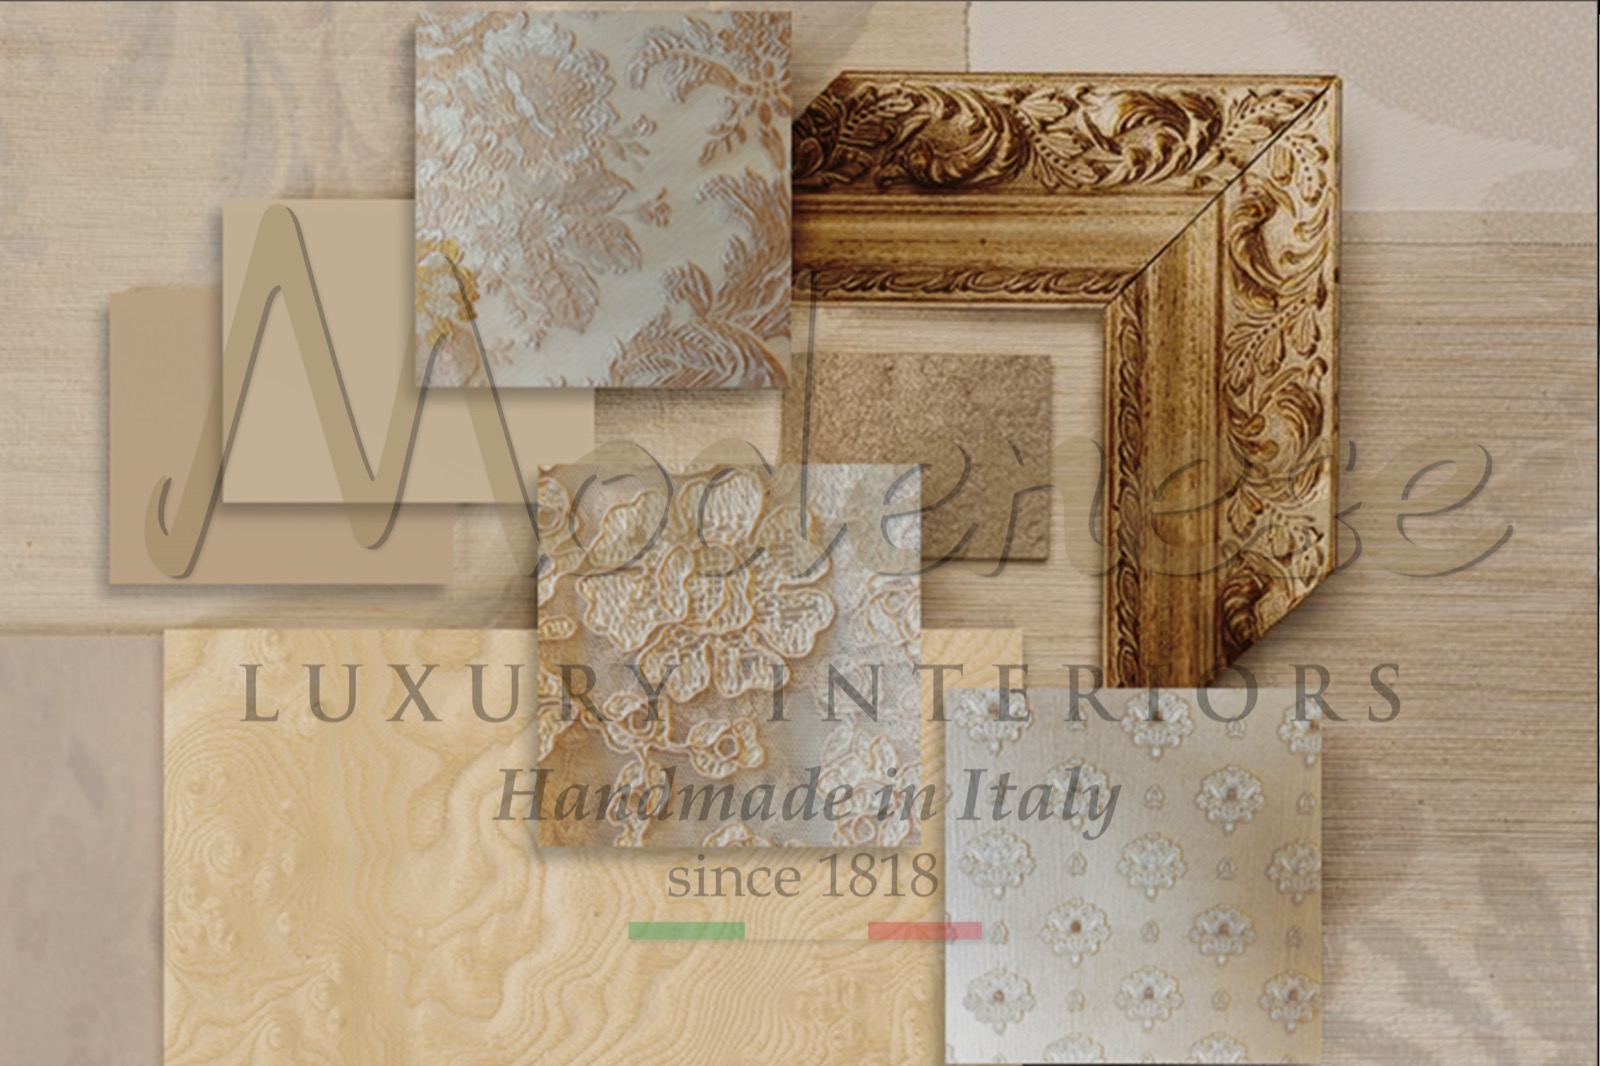 Italian lifestyle contract division interior design studio architects designers bespoke furniture made in Italy artisans craftsmanship artisanal manufacturing dreams come true home decoration luxury living classic baroque style